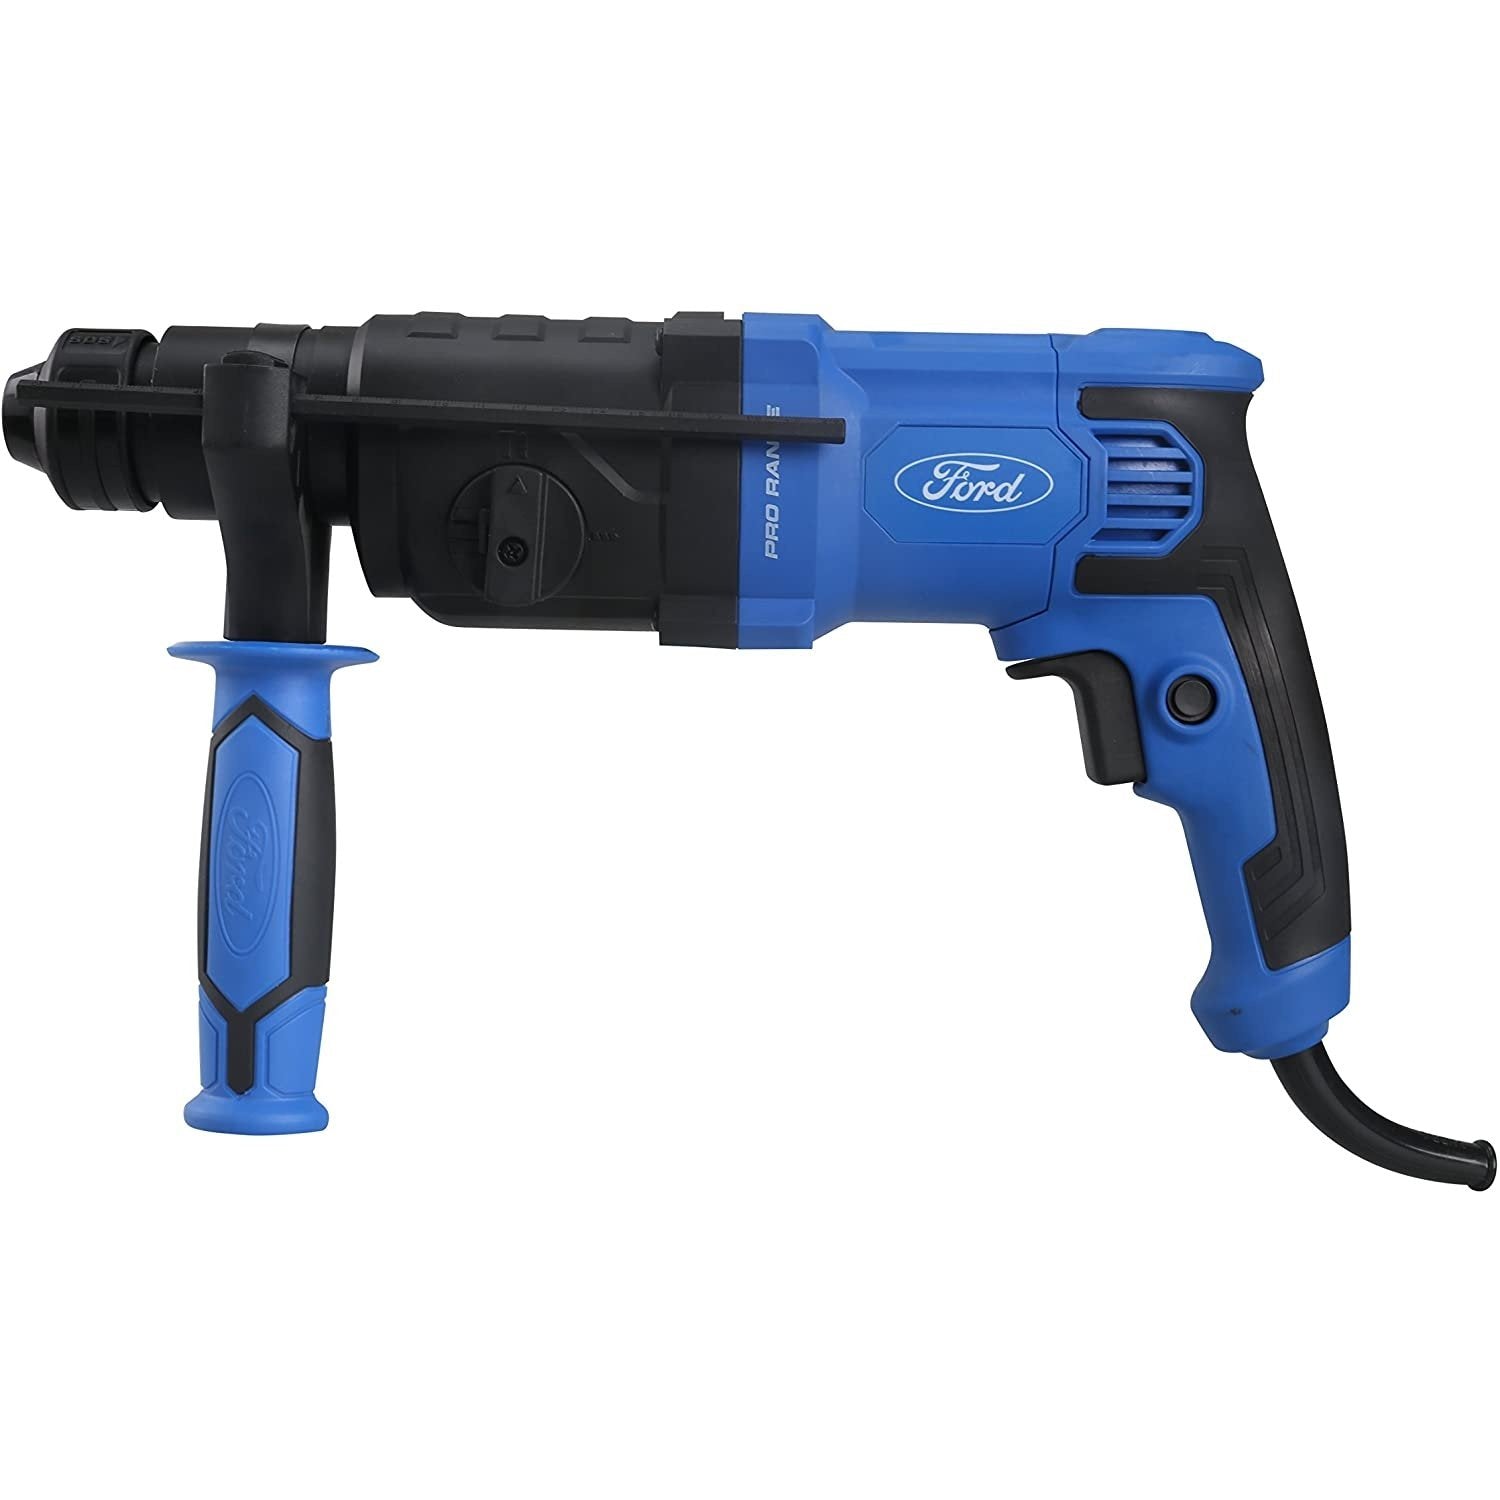 Ford Rotary Hammer Pro. 750W - FP7-0007 | Supply Master | Accra, Ghana Tools Building Steel Engineering Hardware tool